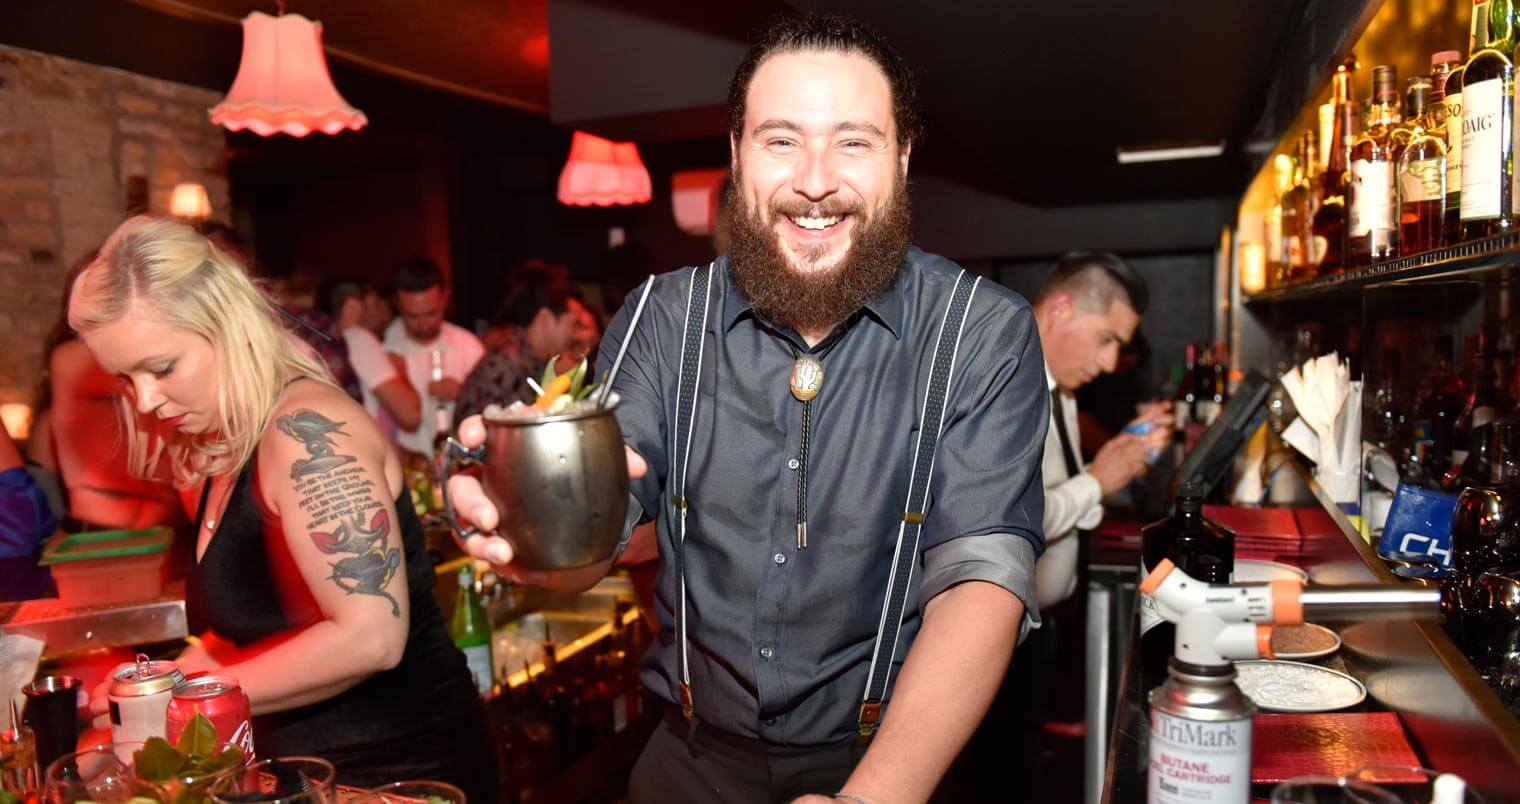 Justin Campbell, smiling behind the bar, featured image